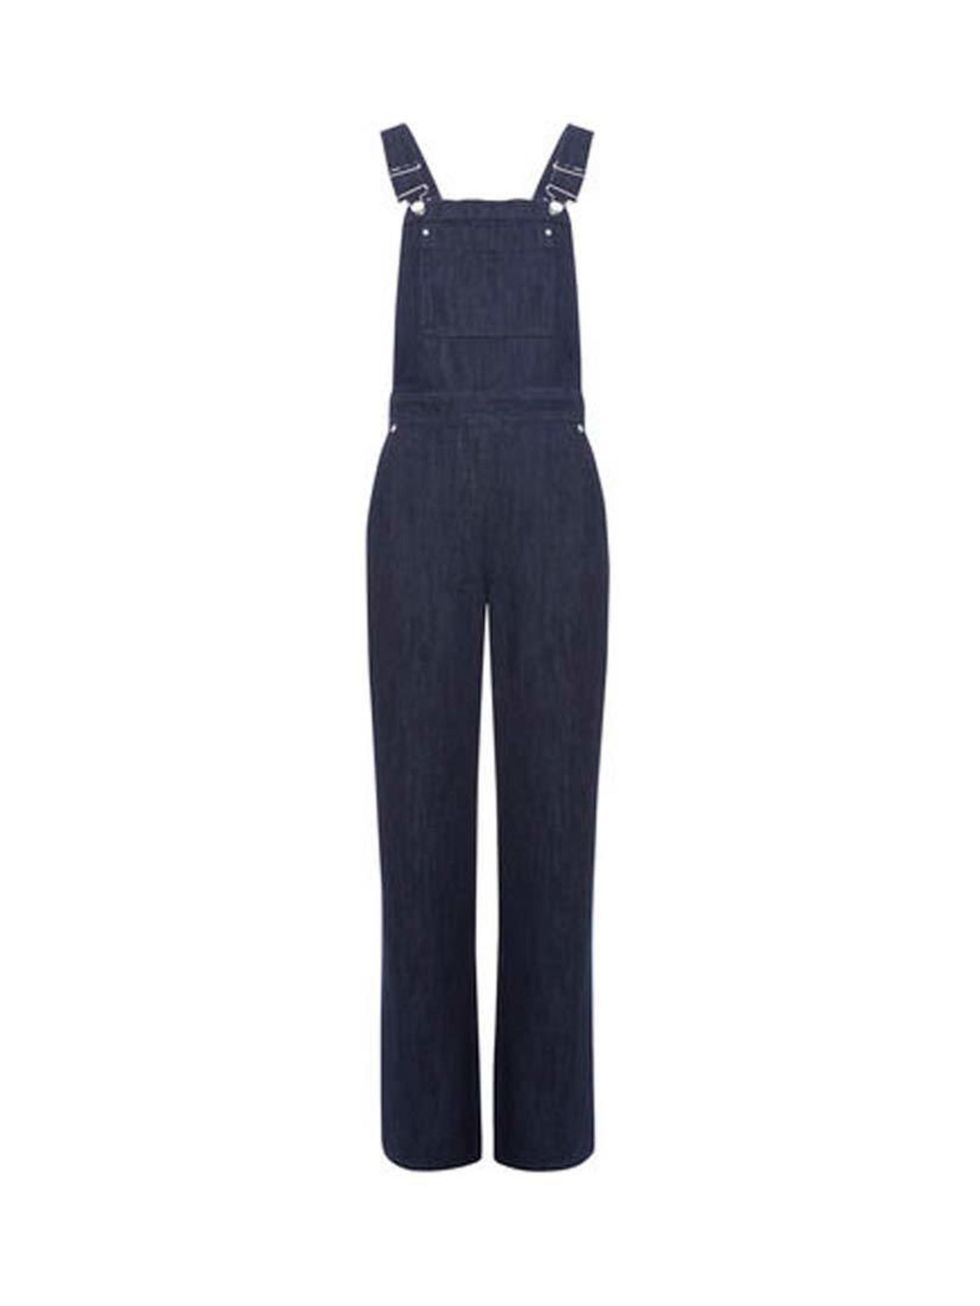 <p>Perfect over a simple breton stripe.</p>

<p><a href="http://www.whistles.com/women/clothing/jeans/wide-leg-dungarees-20915.html?dwvar_wide-leg-dungarees-20915_color=Denim" target="_blank">Whistles</a> dungarees, £120</p>